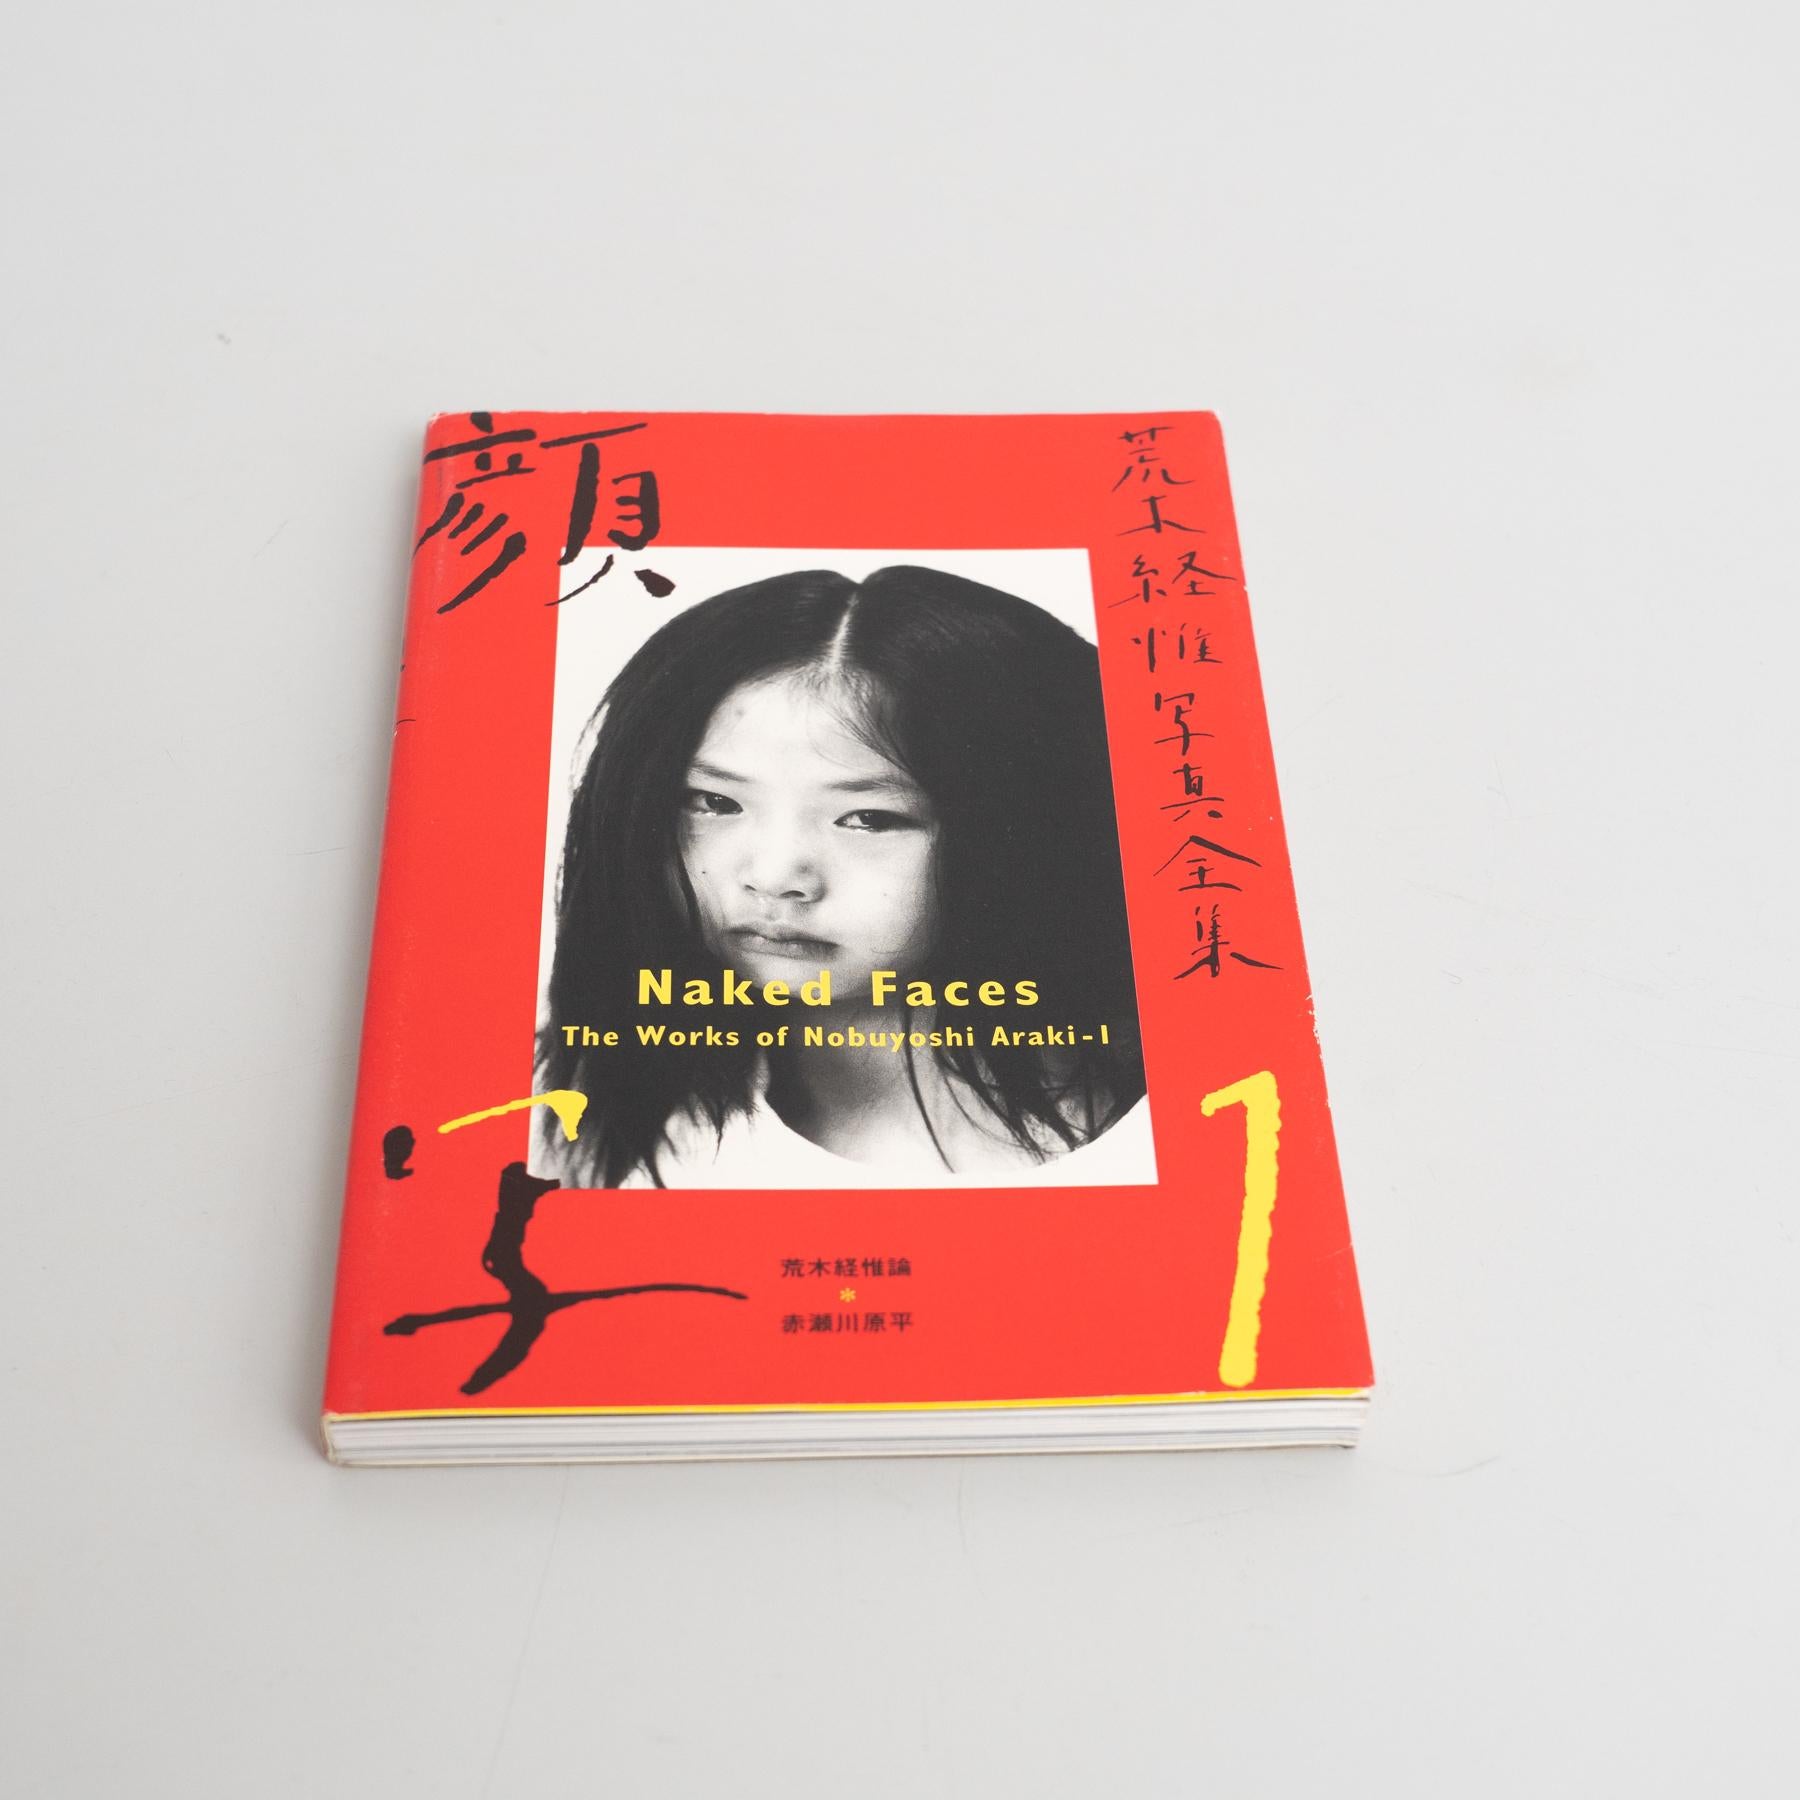 The works of Nobuyoshi Araki Book collection Nº1 published in Japan in 1996 by Heibonsha Limited, Publisher.

Nobuyoshi Araki born May 25, 1940) is a Japanese photographer and contemporary artist.

Having published over 350 books by 2005, and still